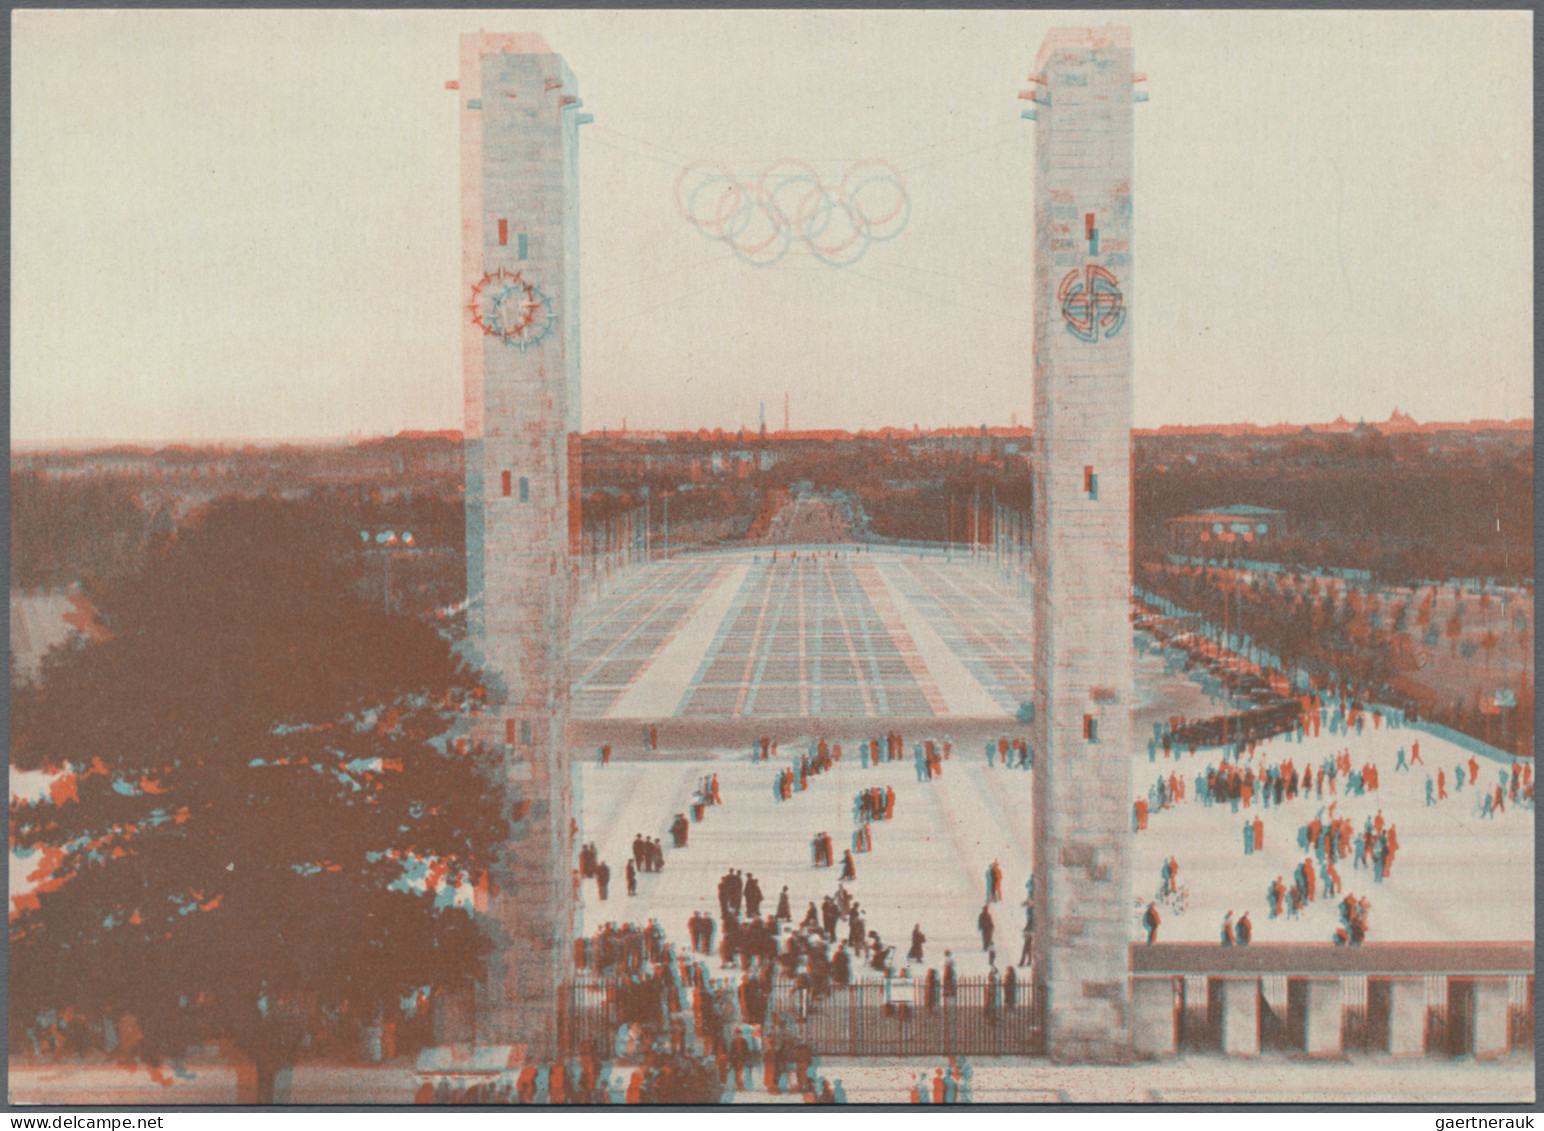 Thematics: Olympic Games: 1936. Berlin Olympics. Lot with 10 different plostoreo